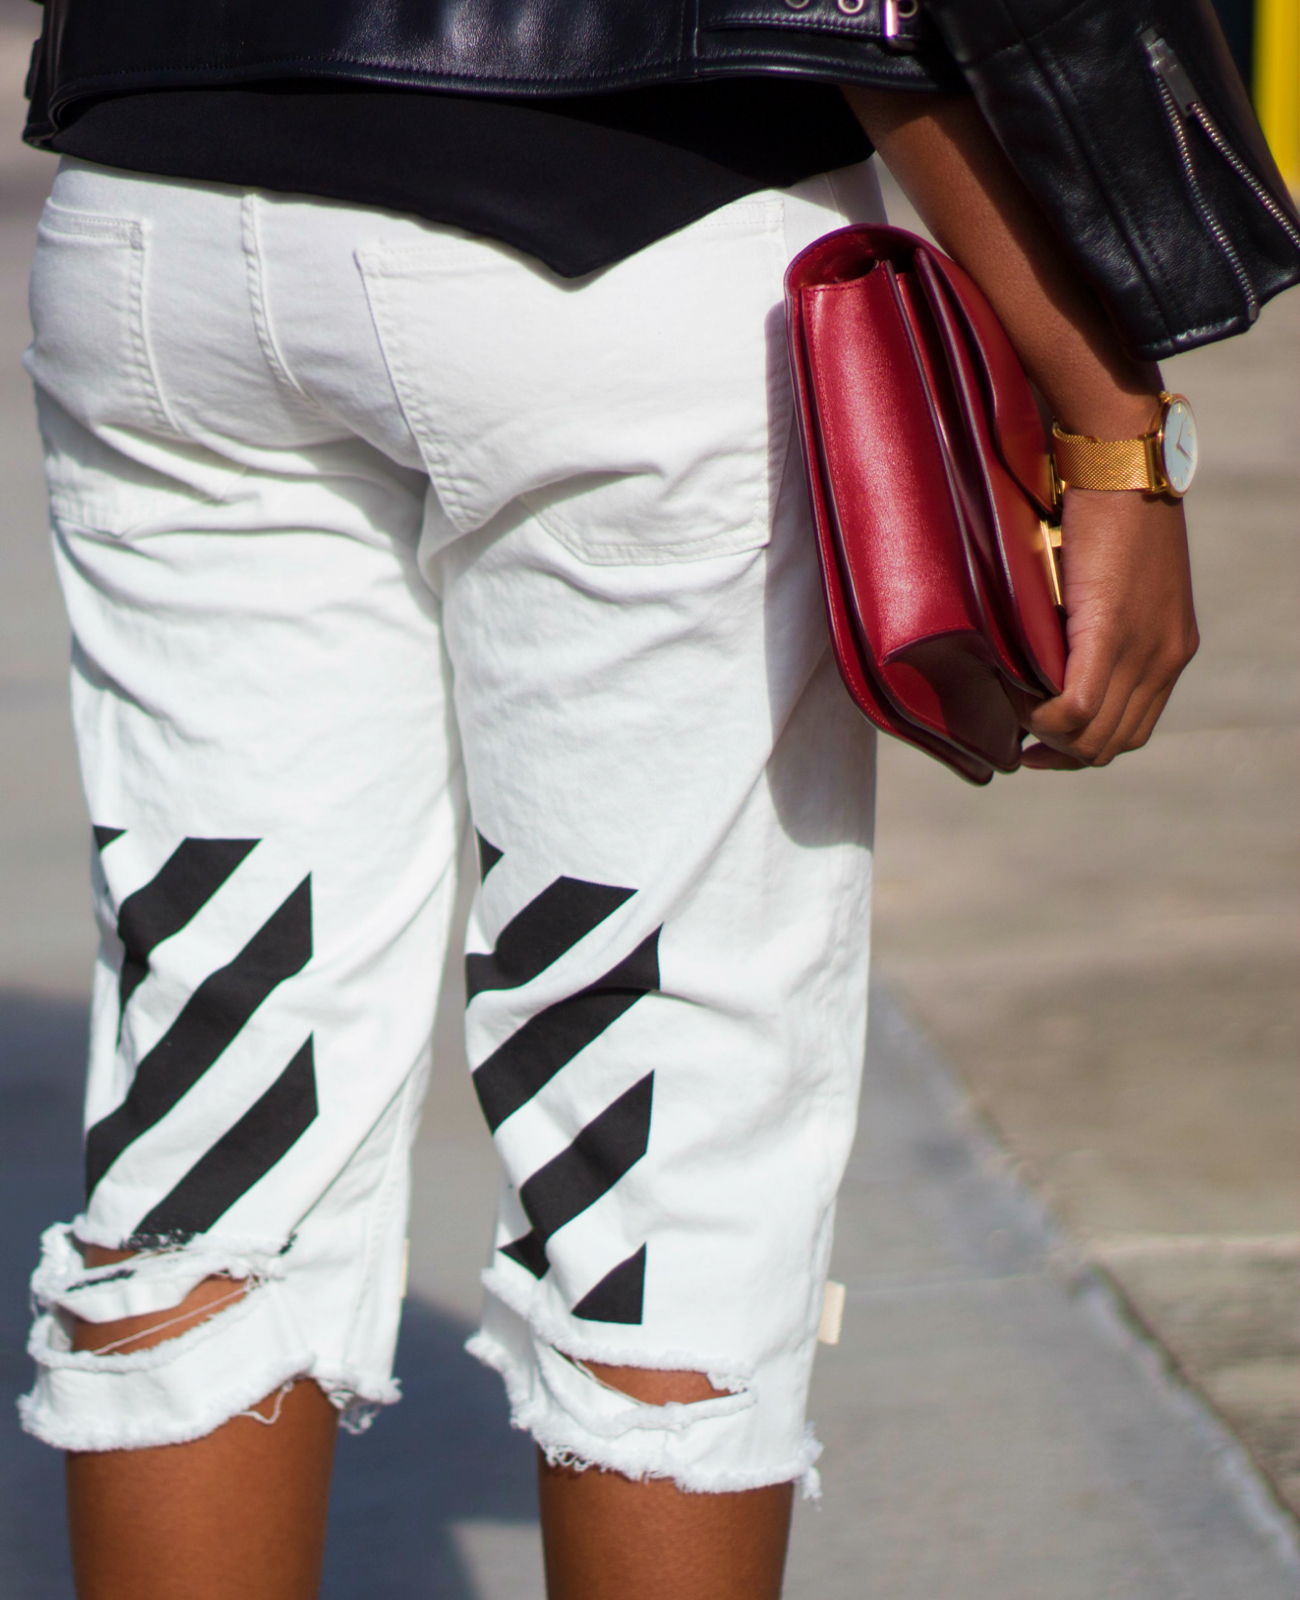 Off-white jeans